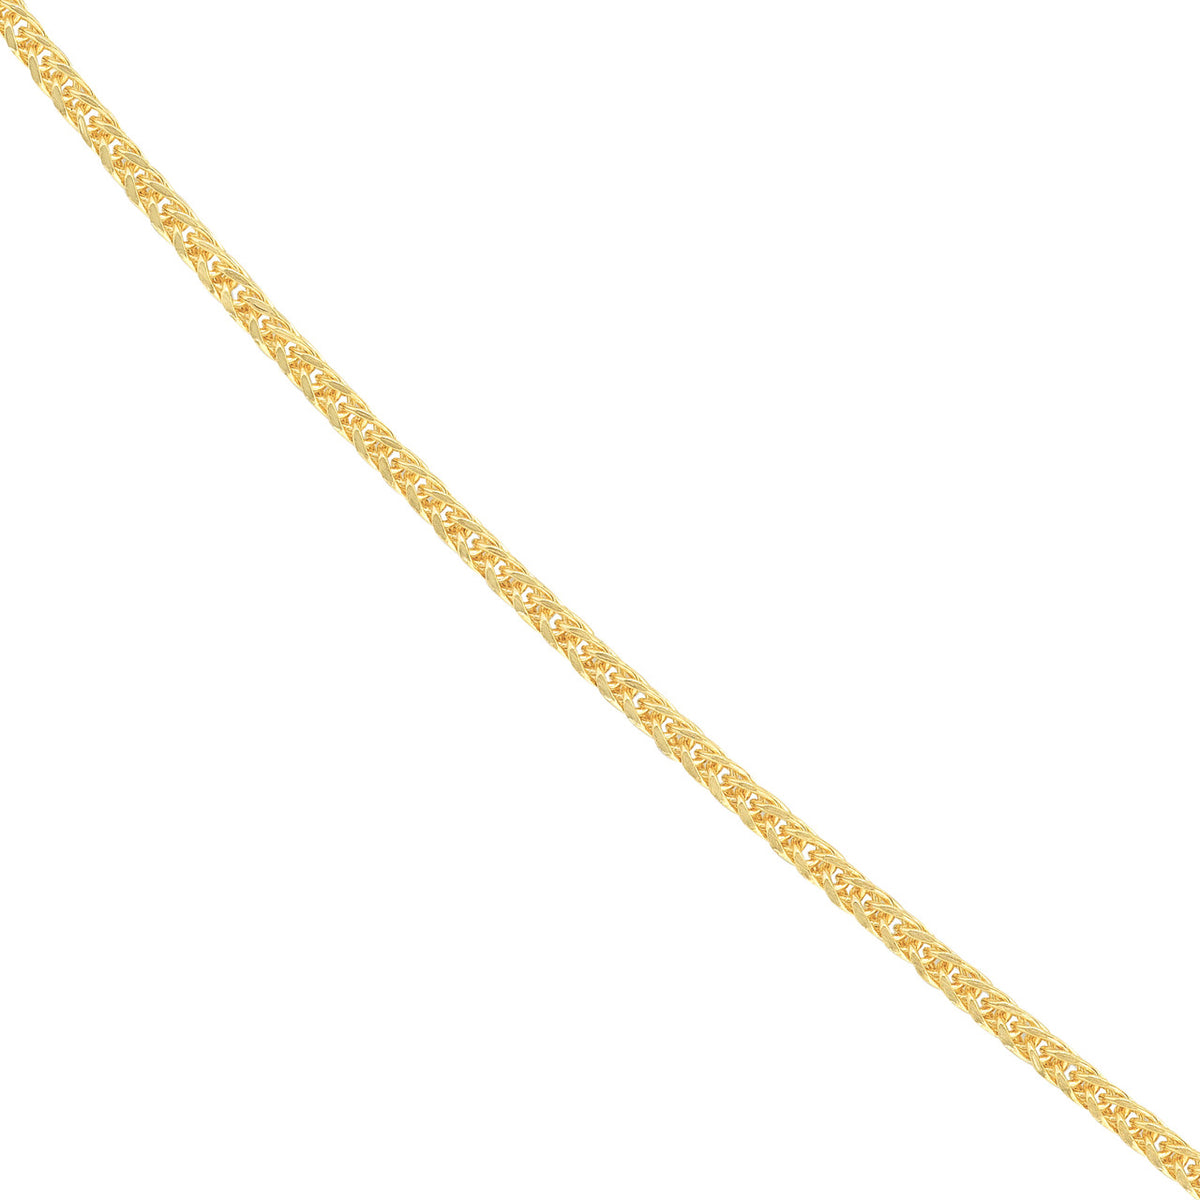 14K Yellow Gold or White Gold 1.50mm Square Wheat Chain Necklace with Spring Ring